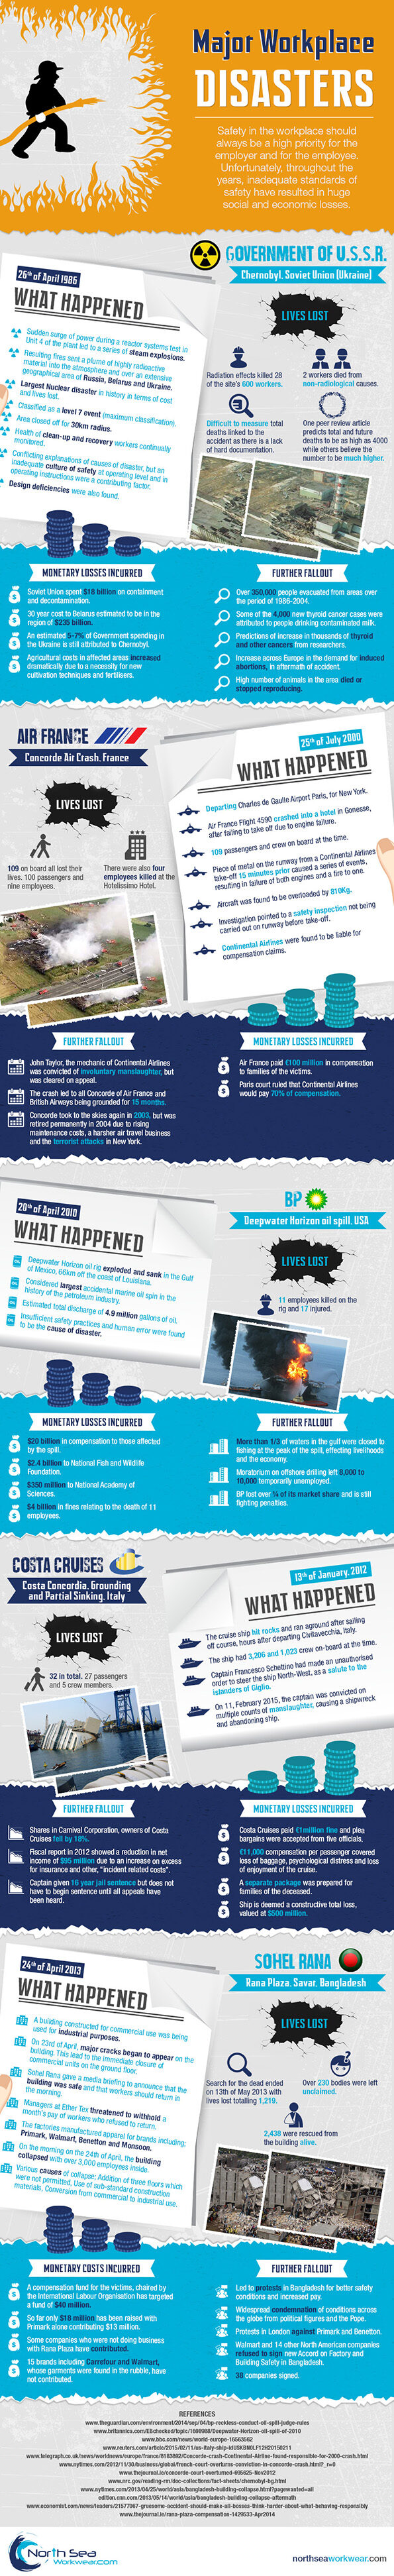 Infographic shows details of major workplace disasters